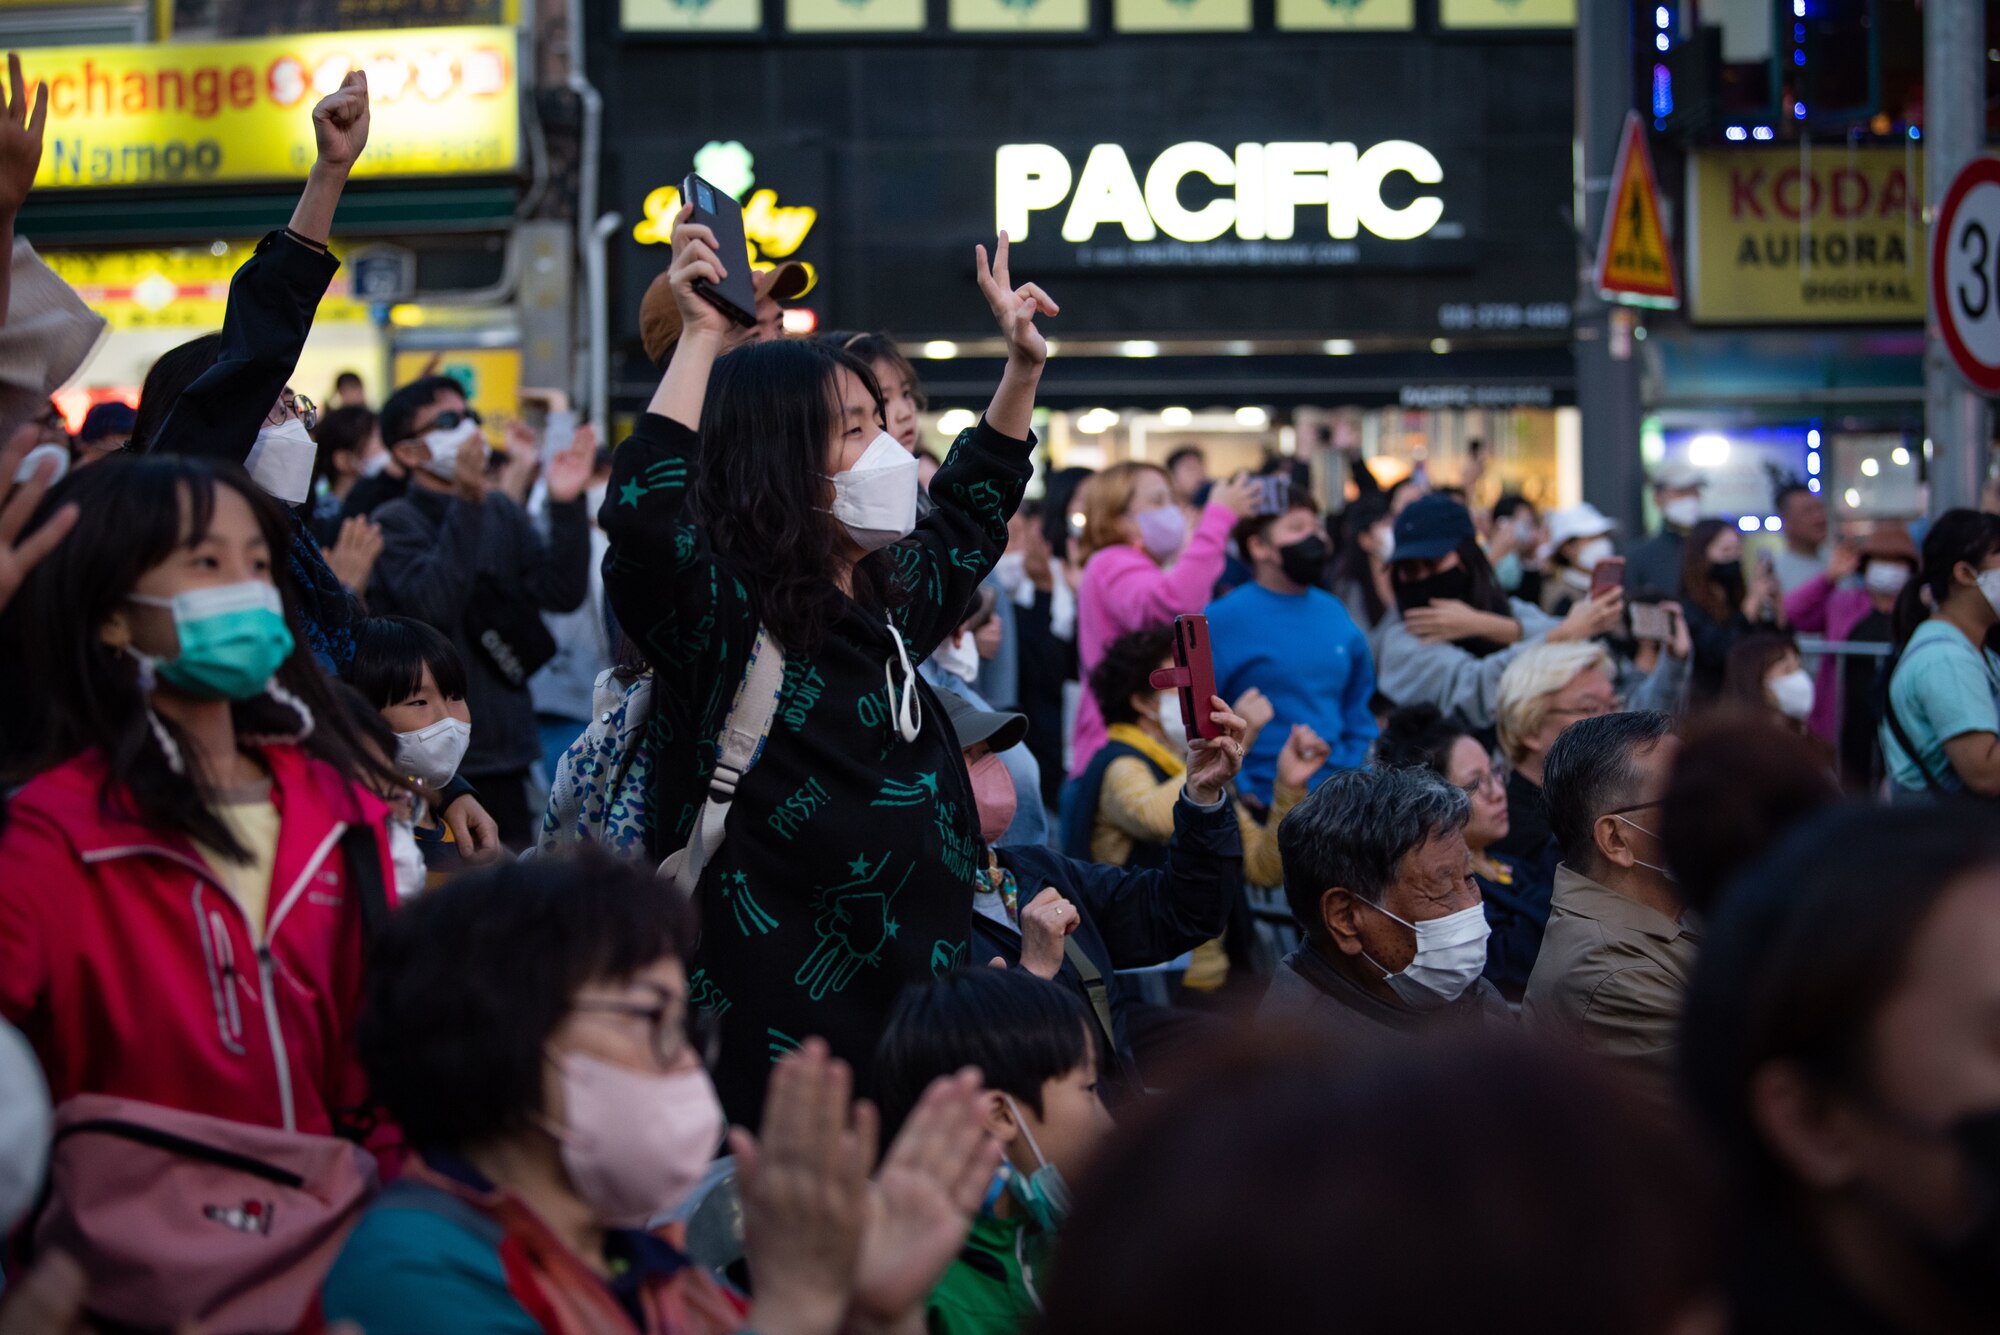 Attendees cheer for performers during the 19th Republic of Korea and the United States Cultural Festival, in front of Osan Air Base, Republic of Korea, Oct. 8, 2022.